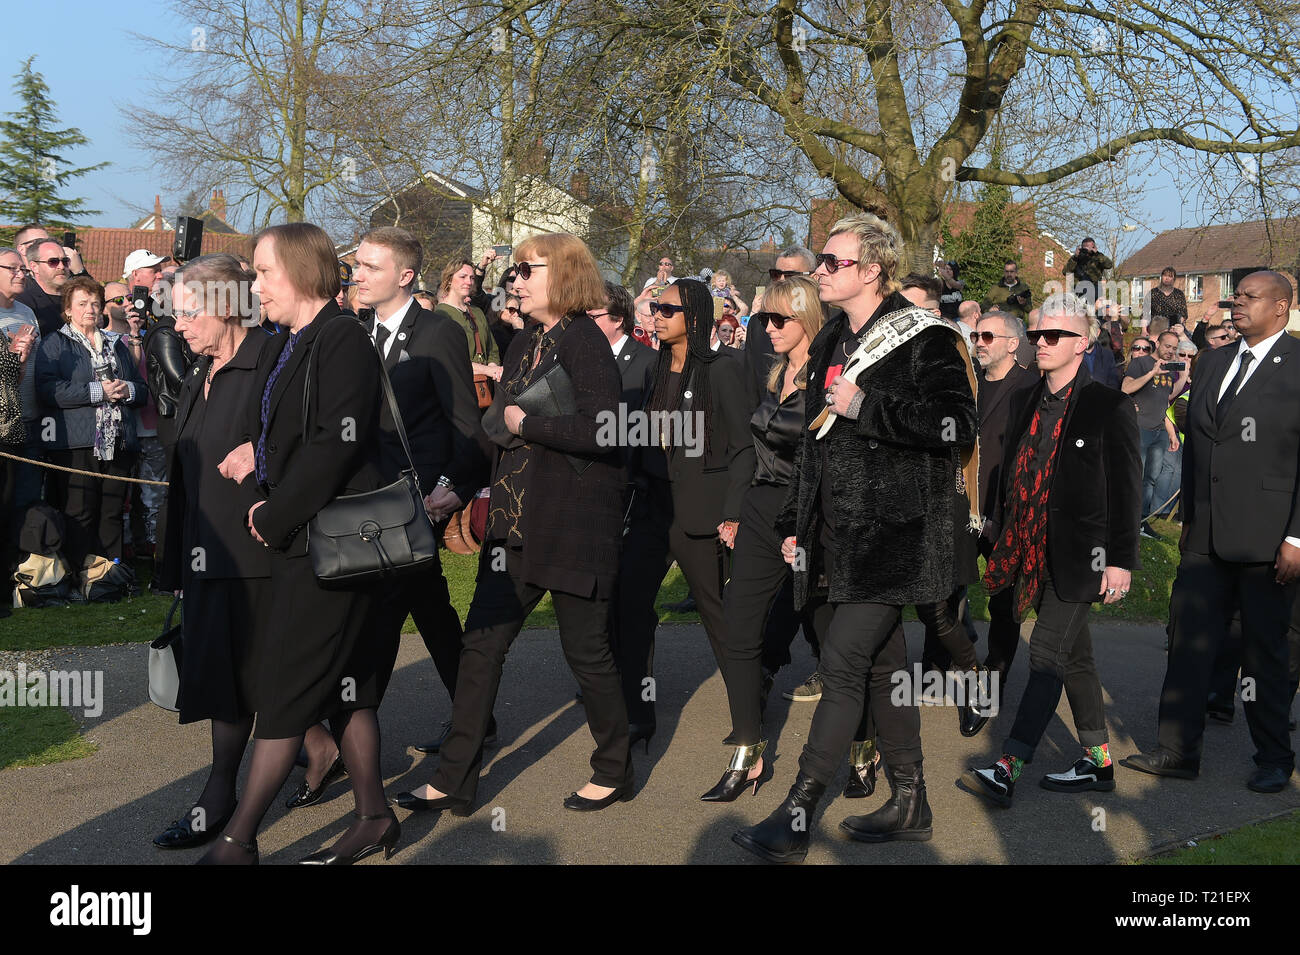 Bocking, Essex, UK. 29th Mar 2019. Bank member Liam Howlett holding a belt arrives at The Funeral of Keith Flint lead singer of The Prodigy takes place at St Mary's Church in Bocking near Braintree Essex. Flint was found dead at his home in North End Essex aged 49 on 4th March 2019 Credit: MARTIN DALTON/Alamy Live News Stock Photo